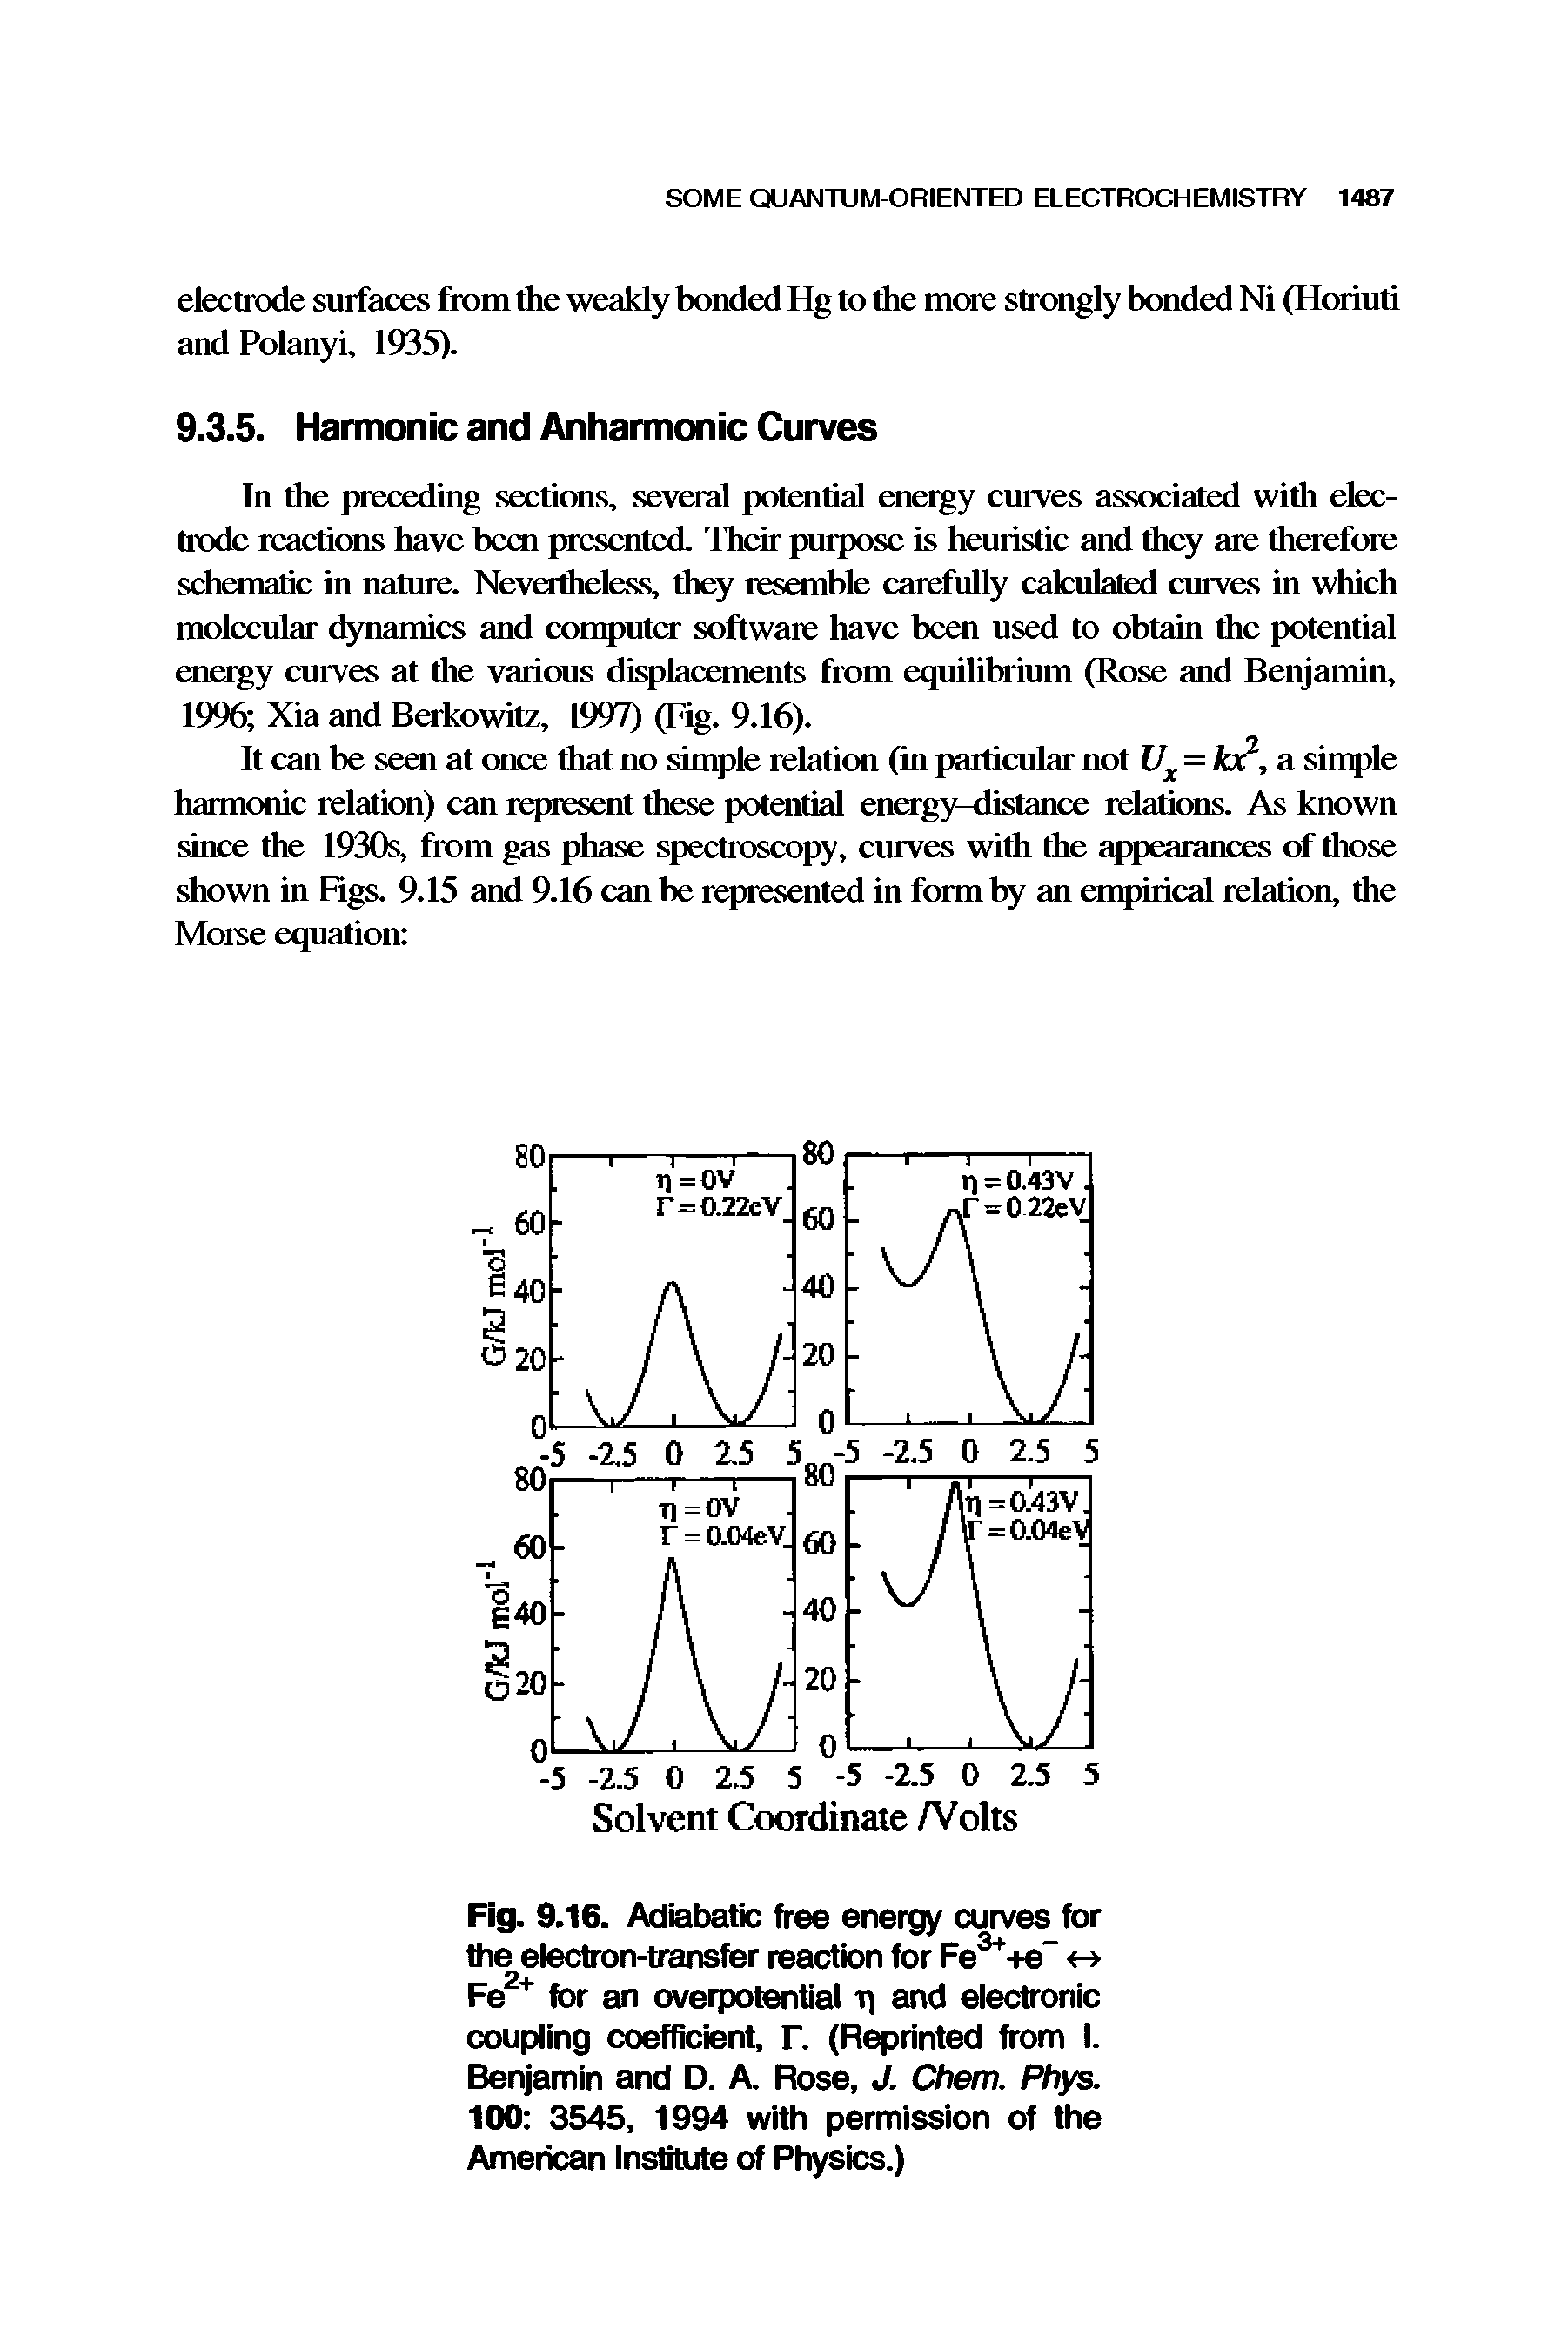 Fig. 9.16. Adiabatic free energy curves for the electron-transfer reaction for Fe +e-Fe2+ for an overpotential q and electronic coupling coefficient, r. (Reprinted from I. Benjamin and D. A. Rose, J. Chem. Phys. 100 3545, 1994 with permission of the American Institute of Physics.)...